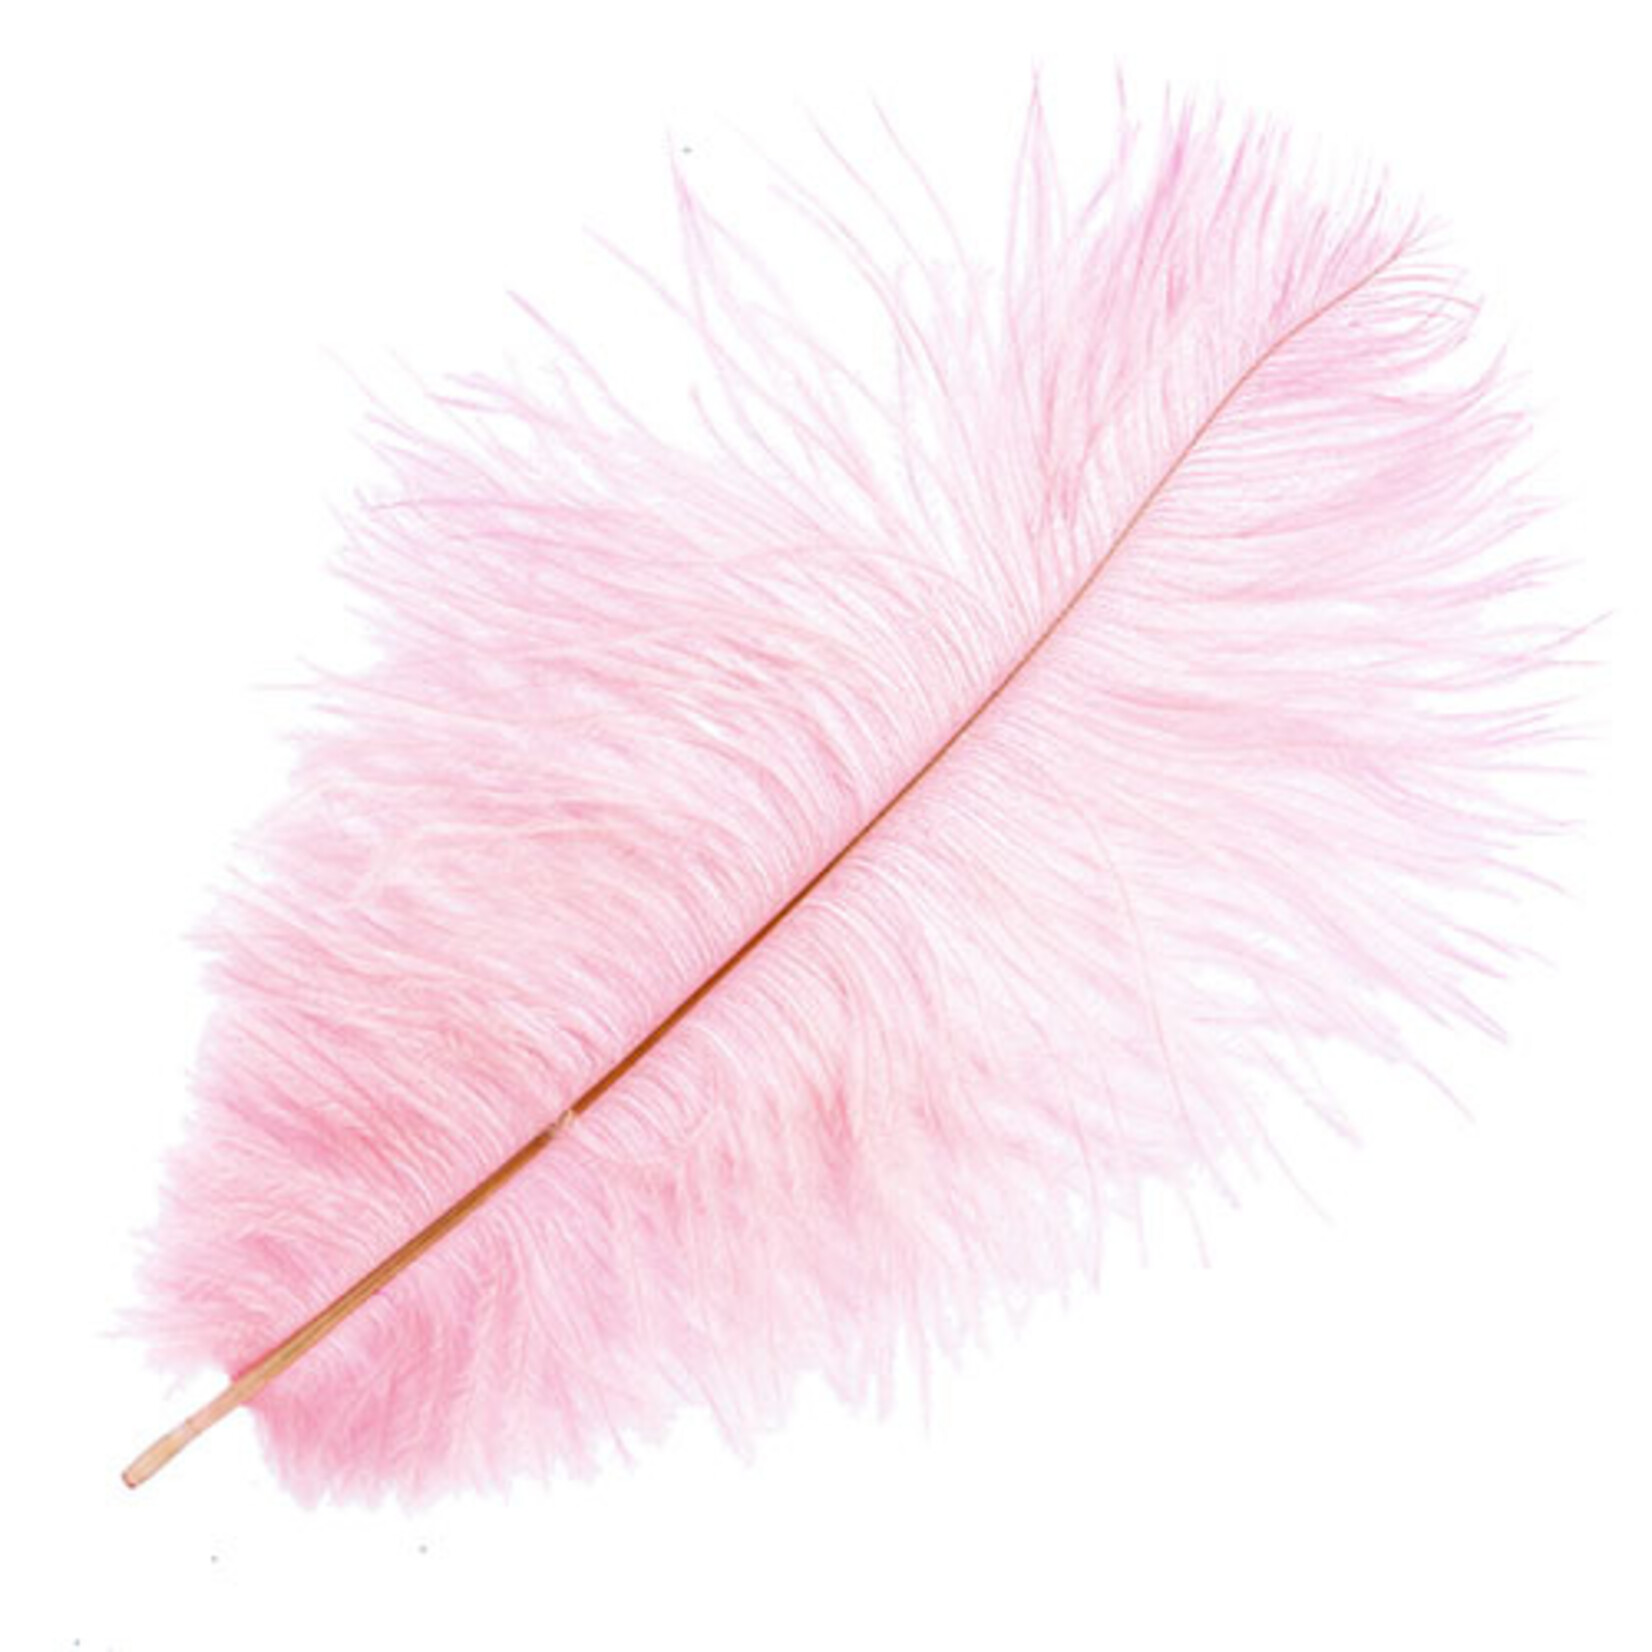 Ostrich Drab Plumes 6-8 Inch (12 pieces) Cotton Candy